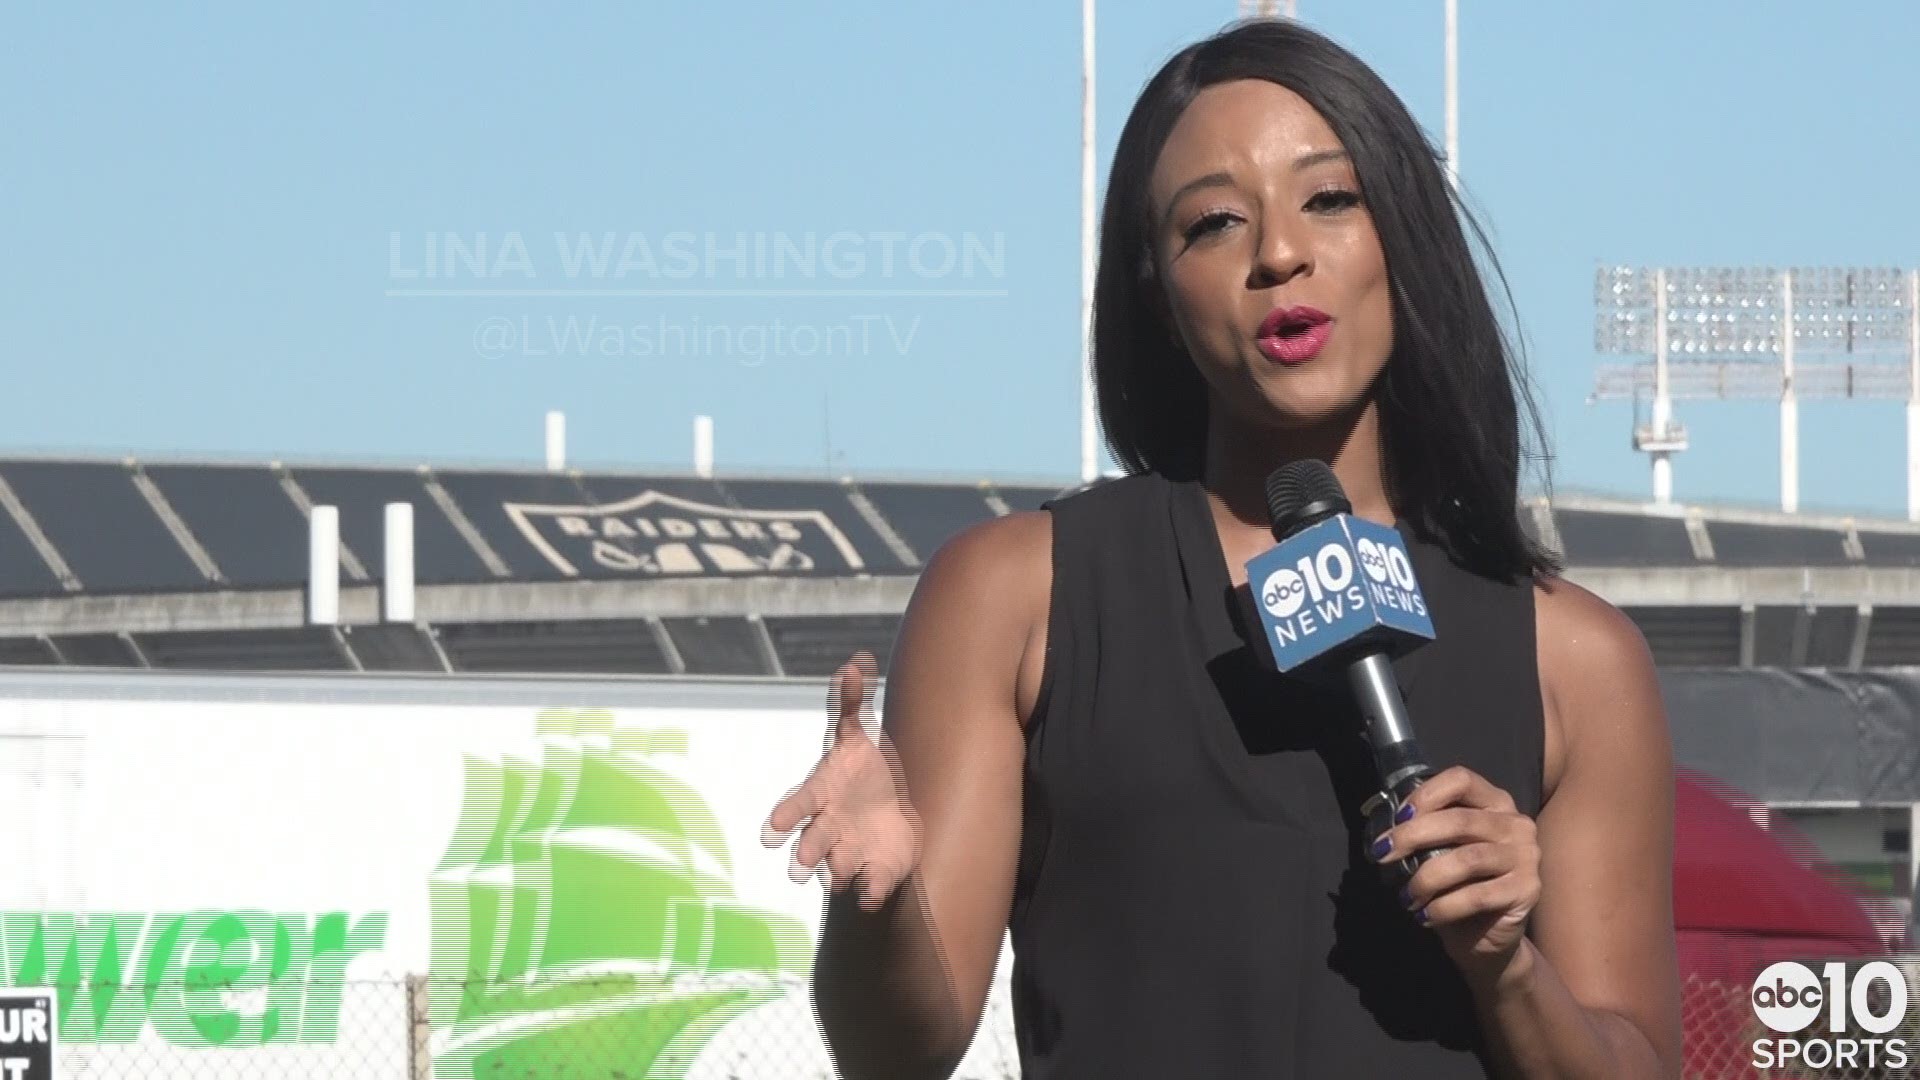 ABC10's Lina Washington takes you to Oakland where the Raiders are preparing for their final season opener in The Bay before relocating to Las Vegas next season. After a preseason filled with Antonio Brown-related drama, the Raiders welcome back Alameda native and UC Davis star Keelan Doss who will get his NFL start with his hometown team.